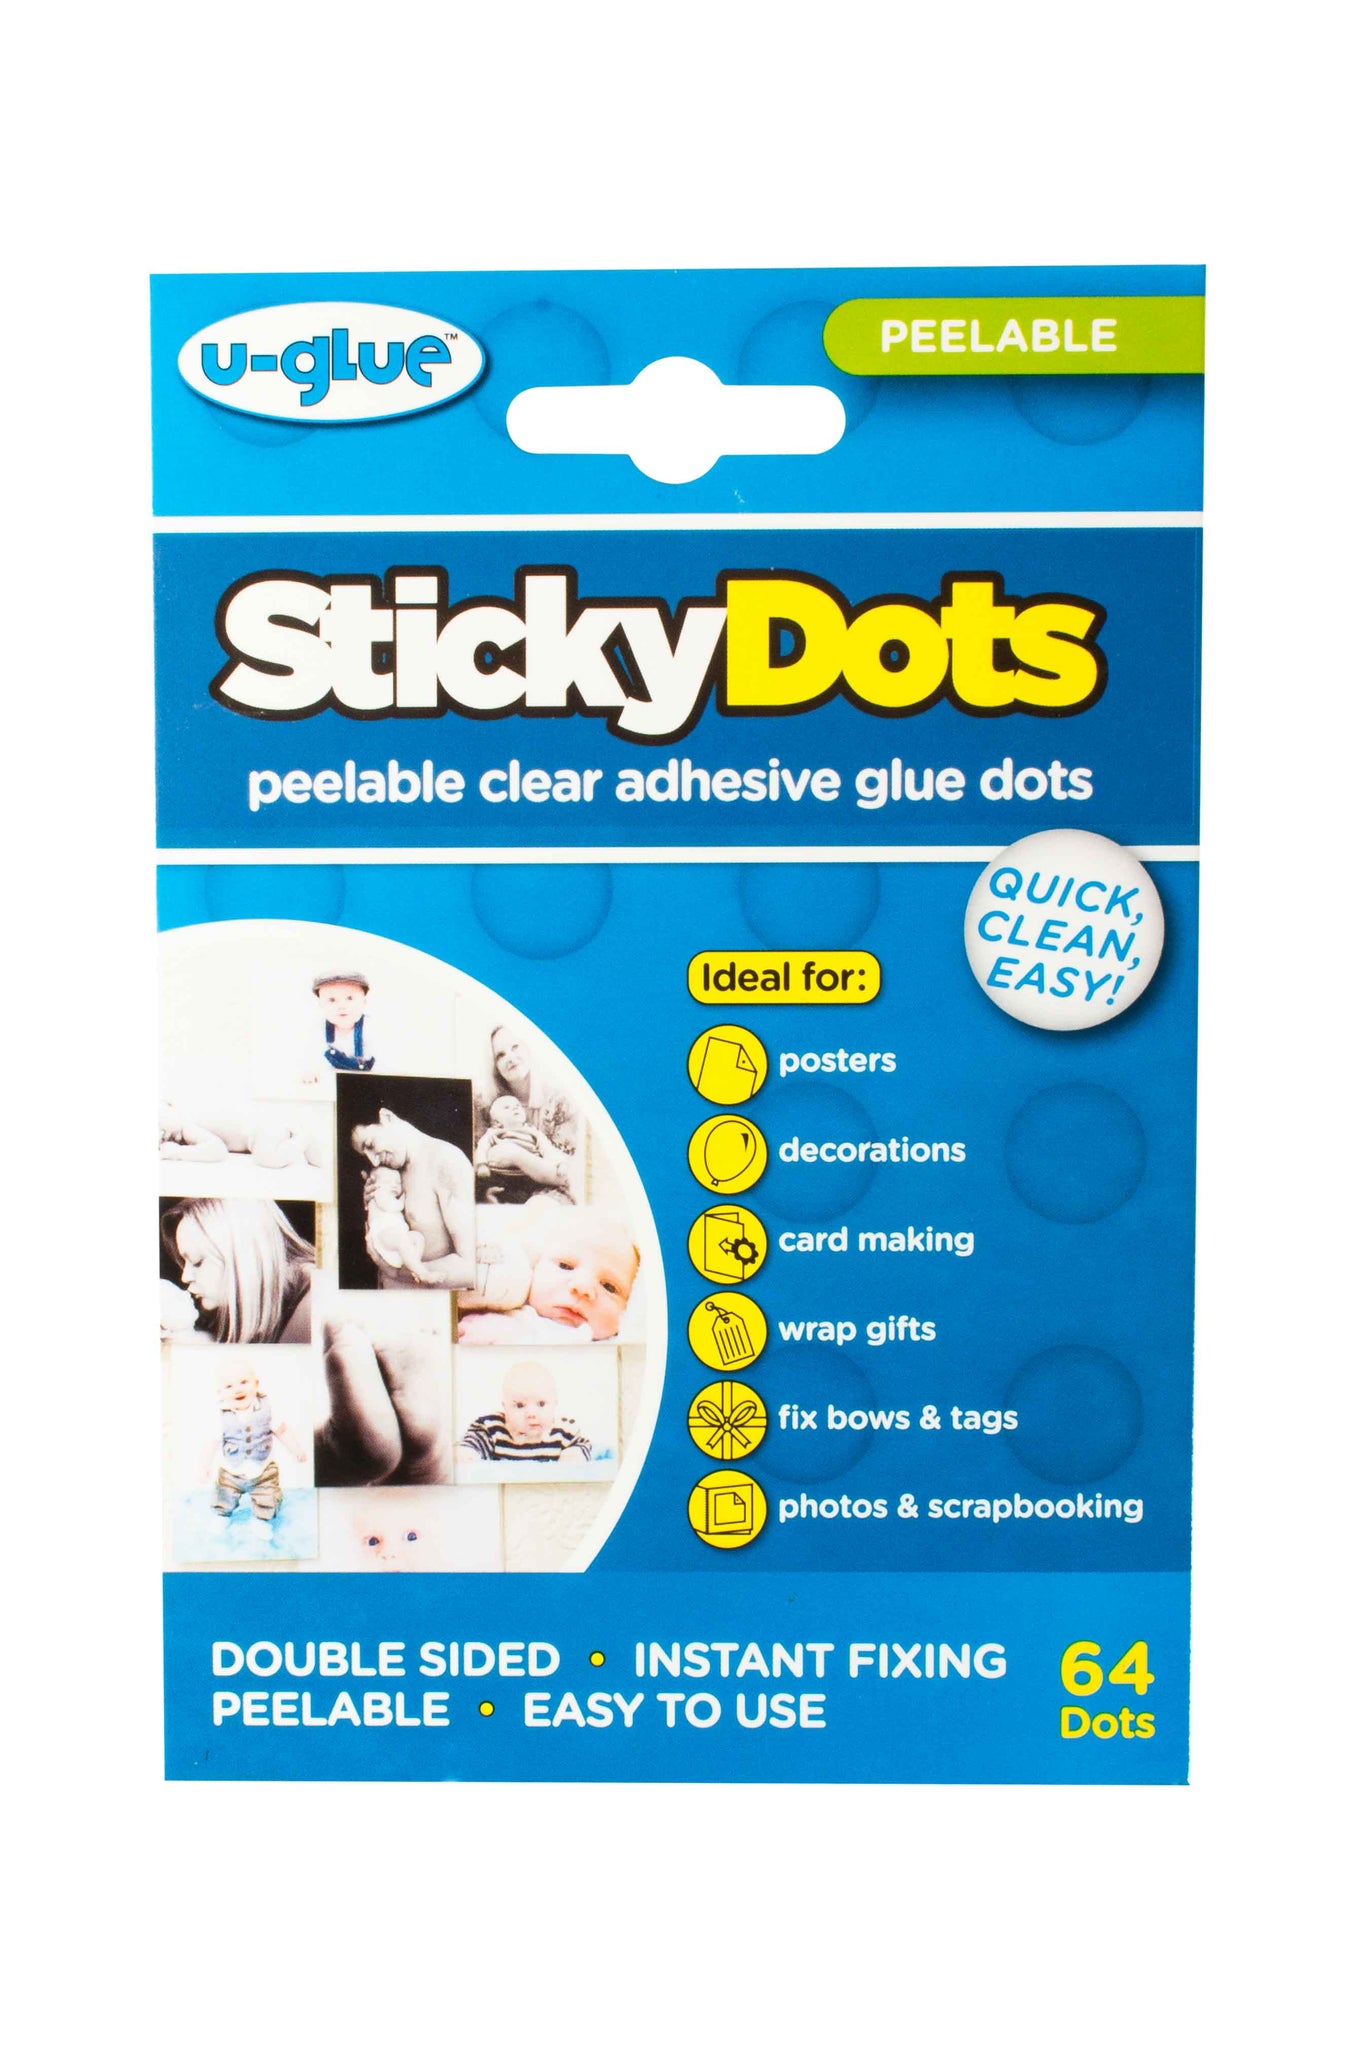 Superdots Easy tack Removable glue dots - Glue dots on a roll